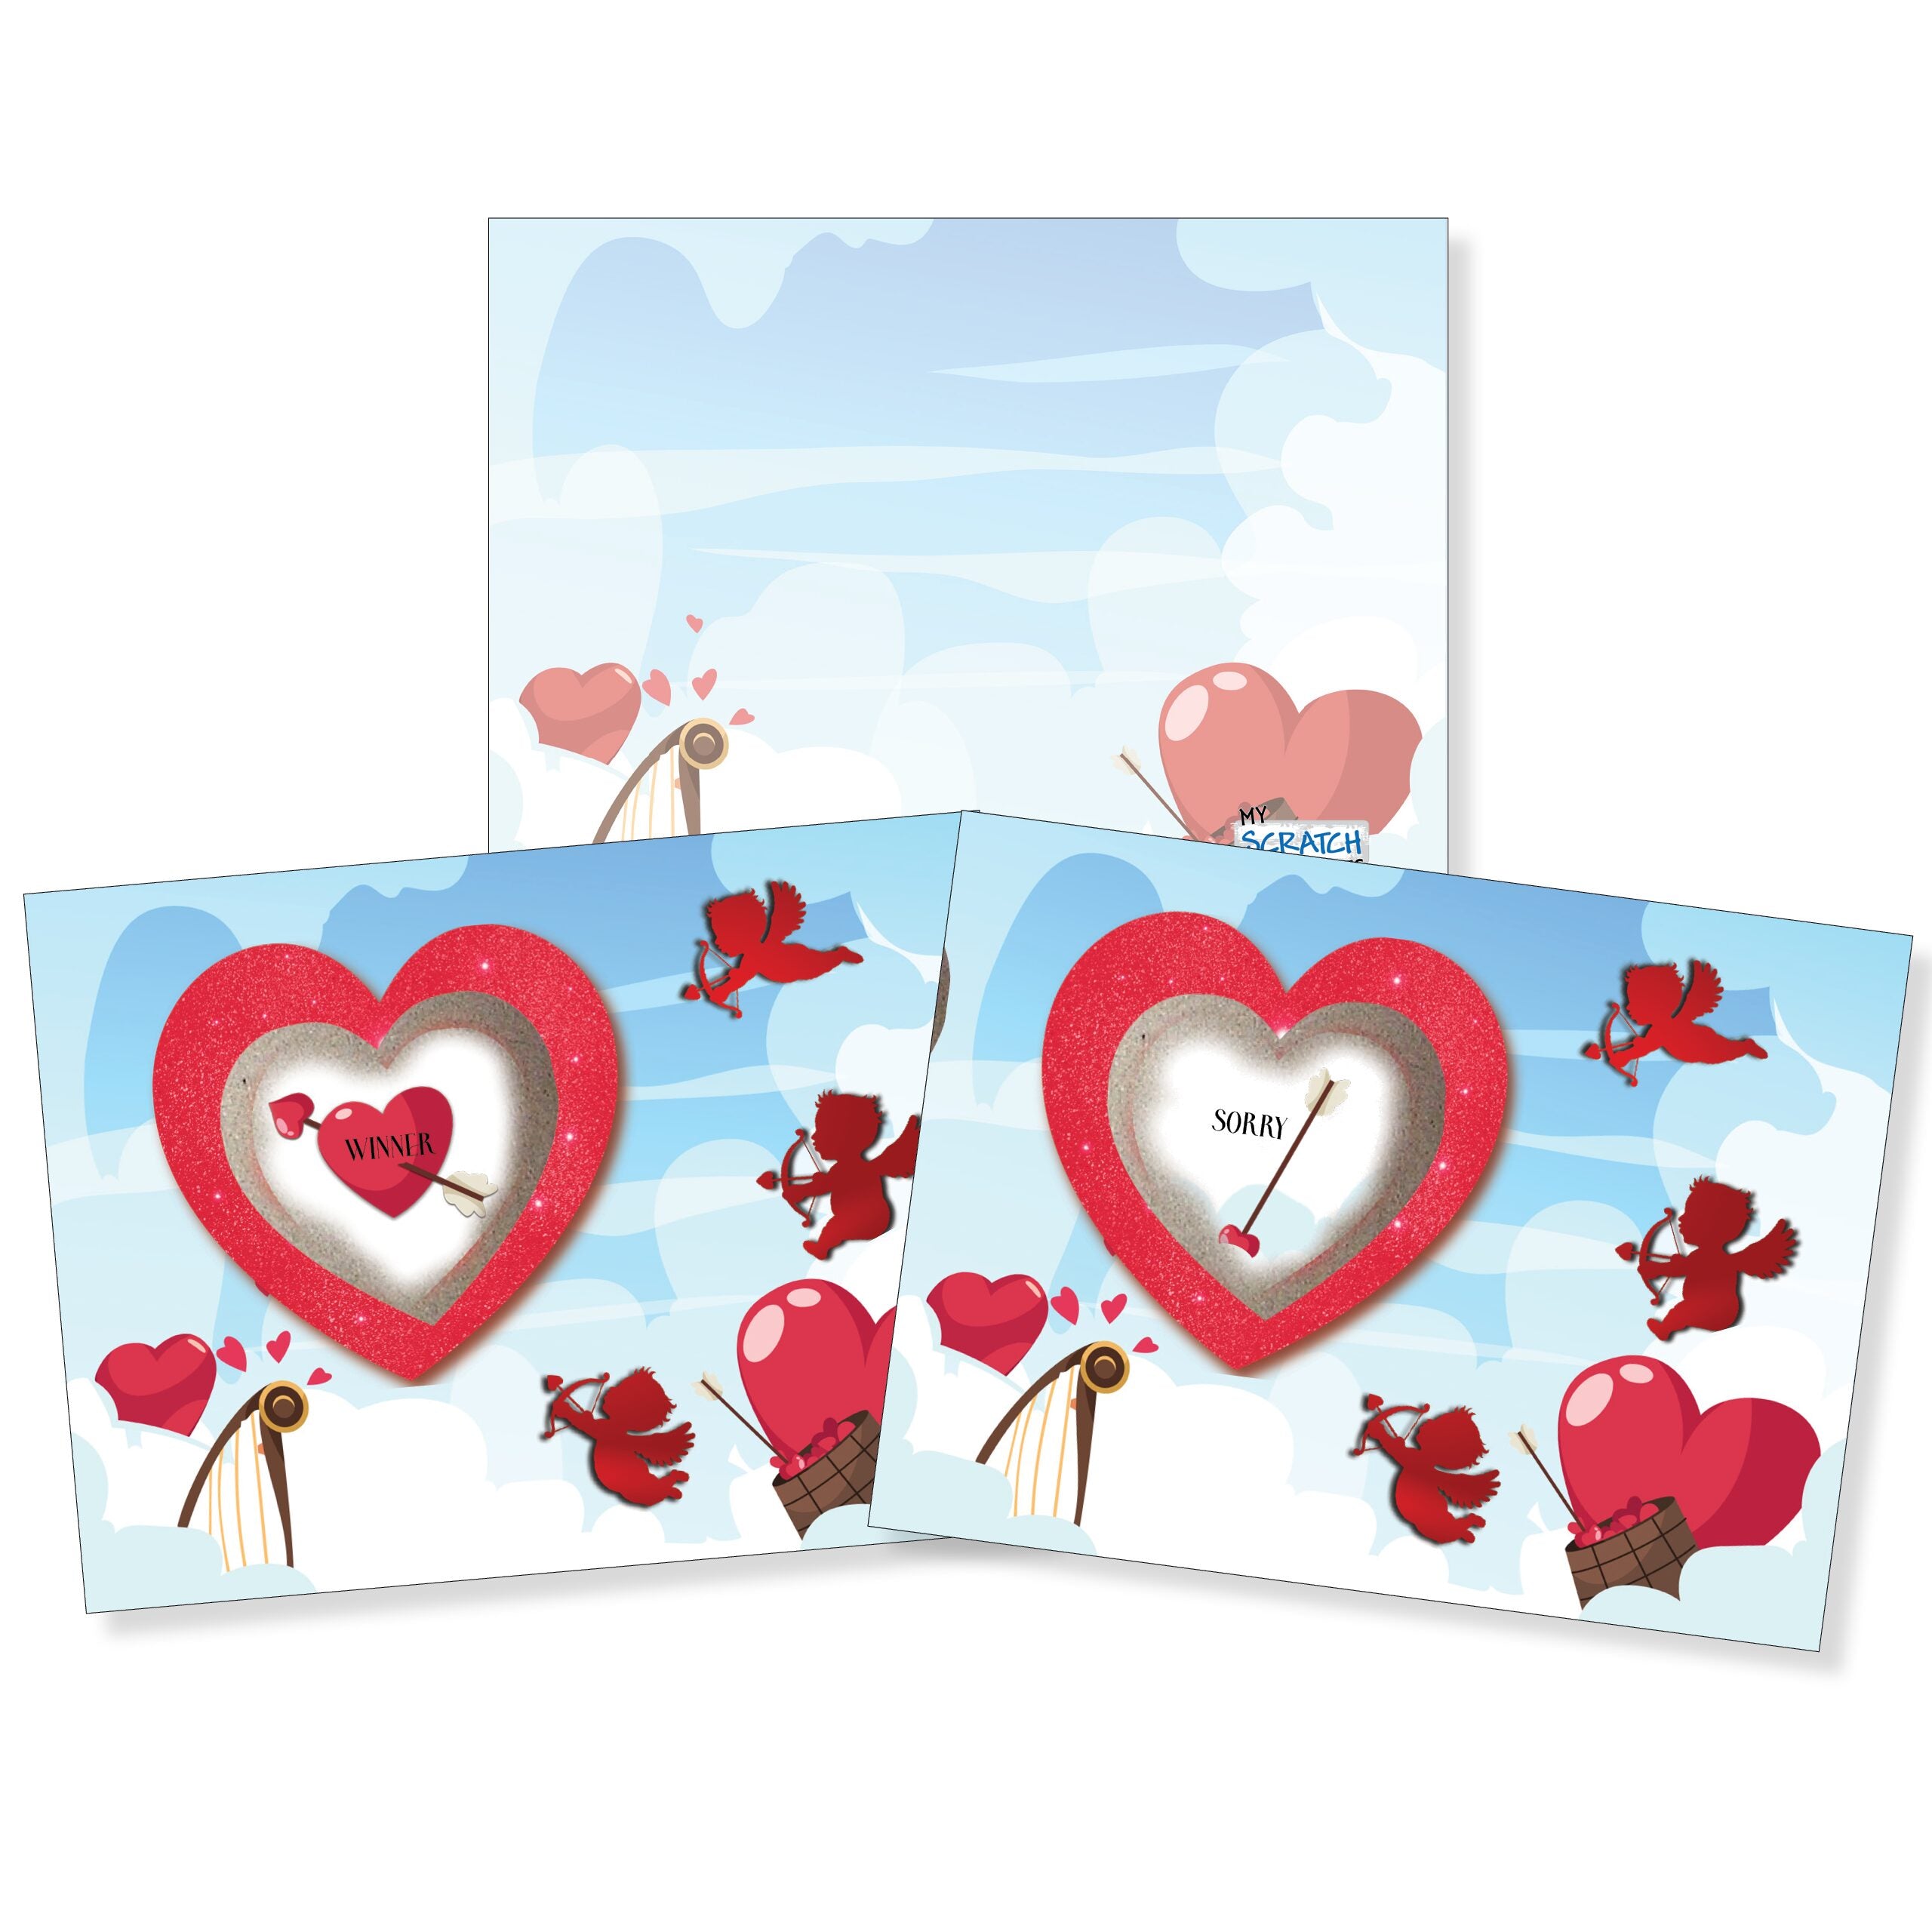 Valentine's Day Cupid's Hearts Game 50 Pack - 5 Winning and 45 Non-Winning Cards - My Scratch Offs